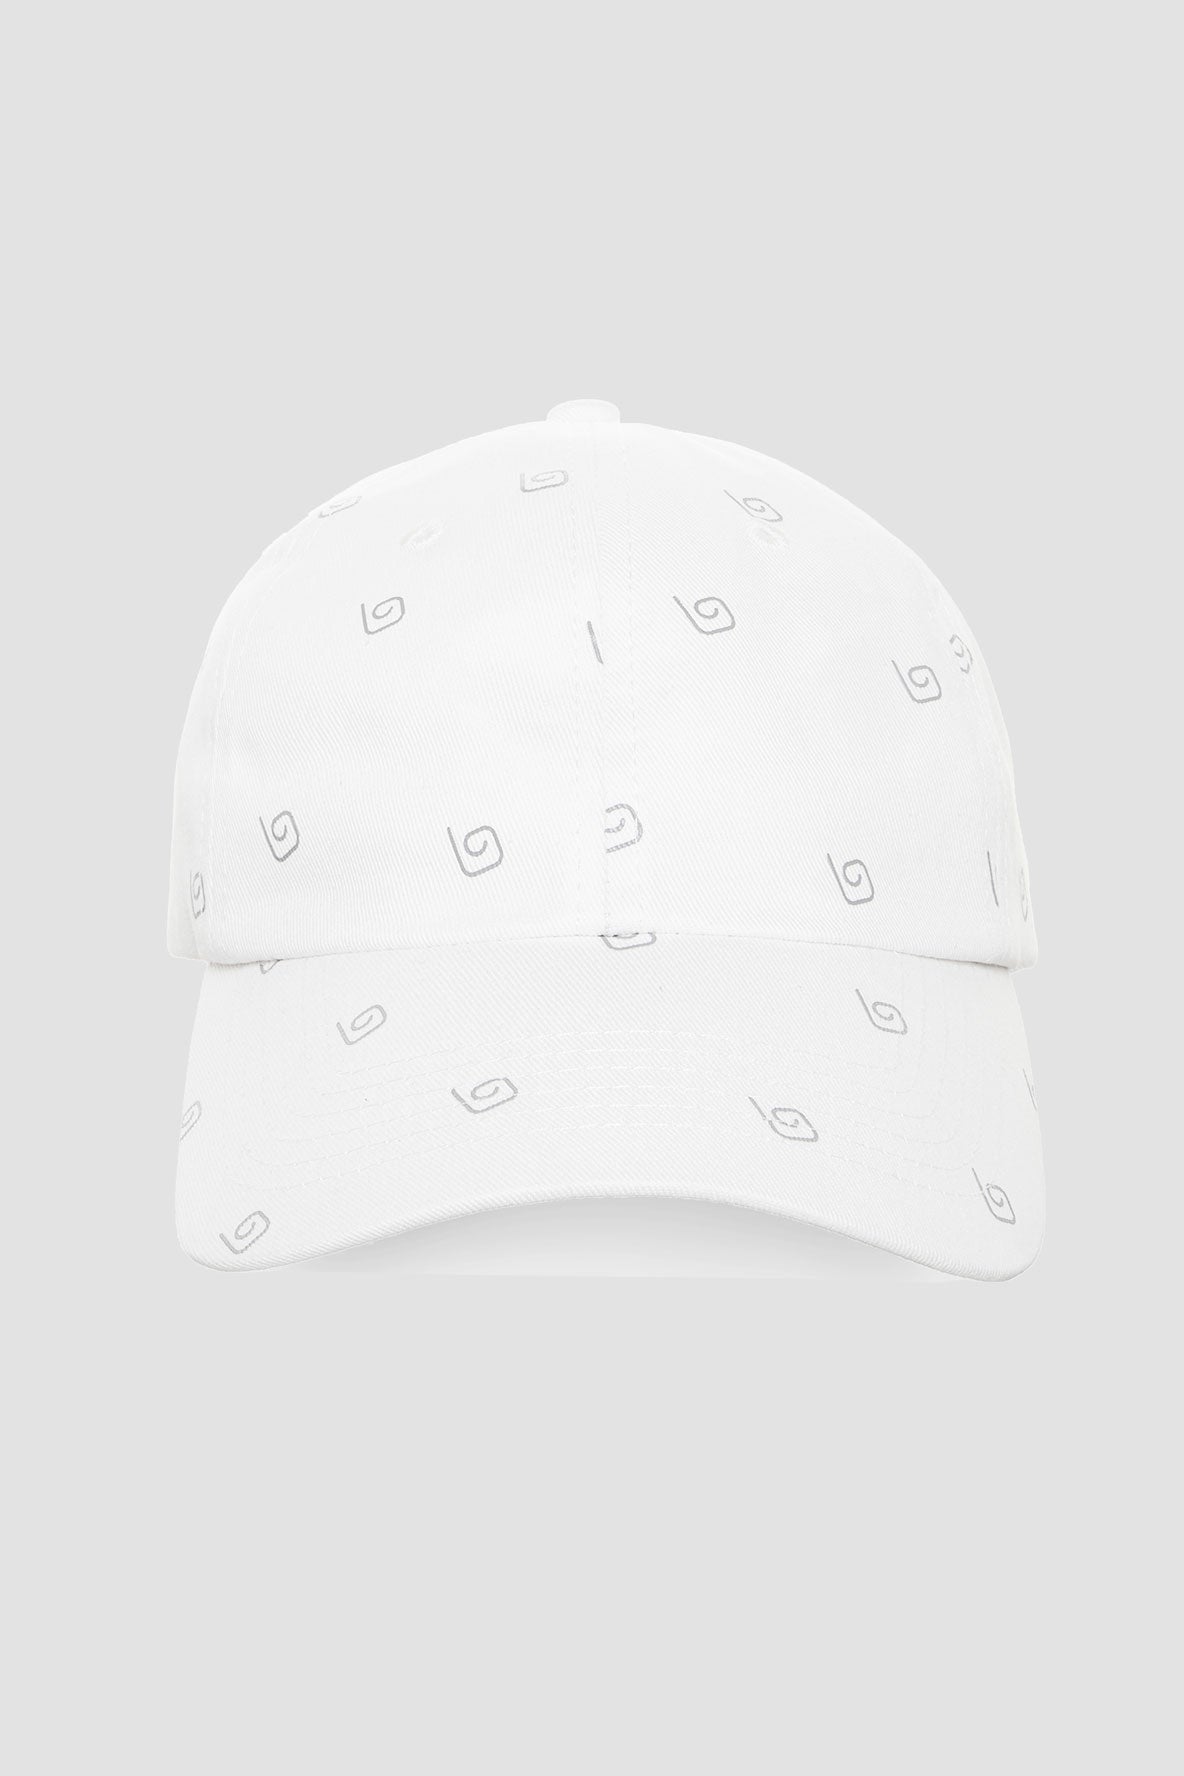 Stylish white monogram cap with 'OLABEN' logo, perfect headwear accessory for a trendy look.